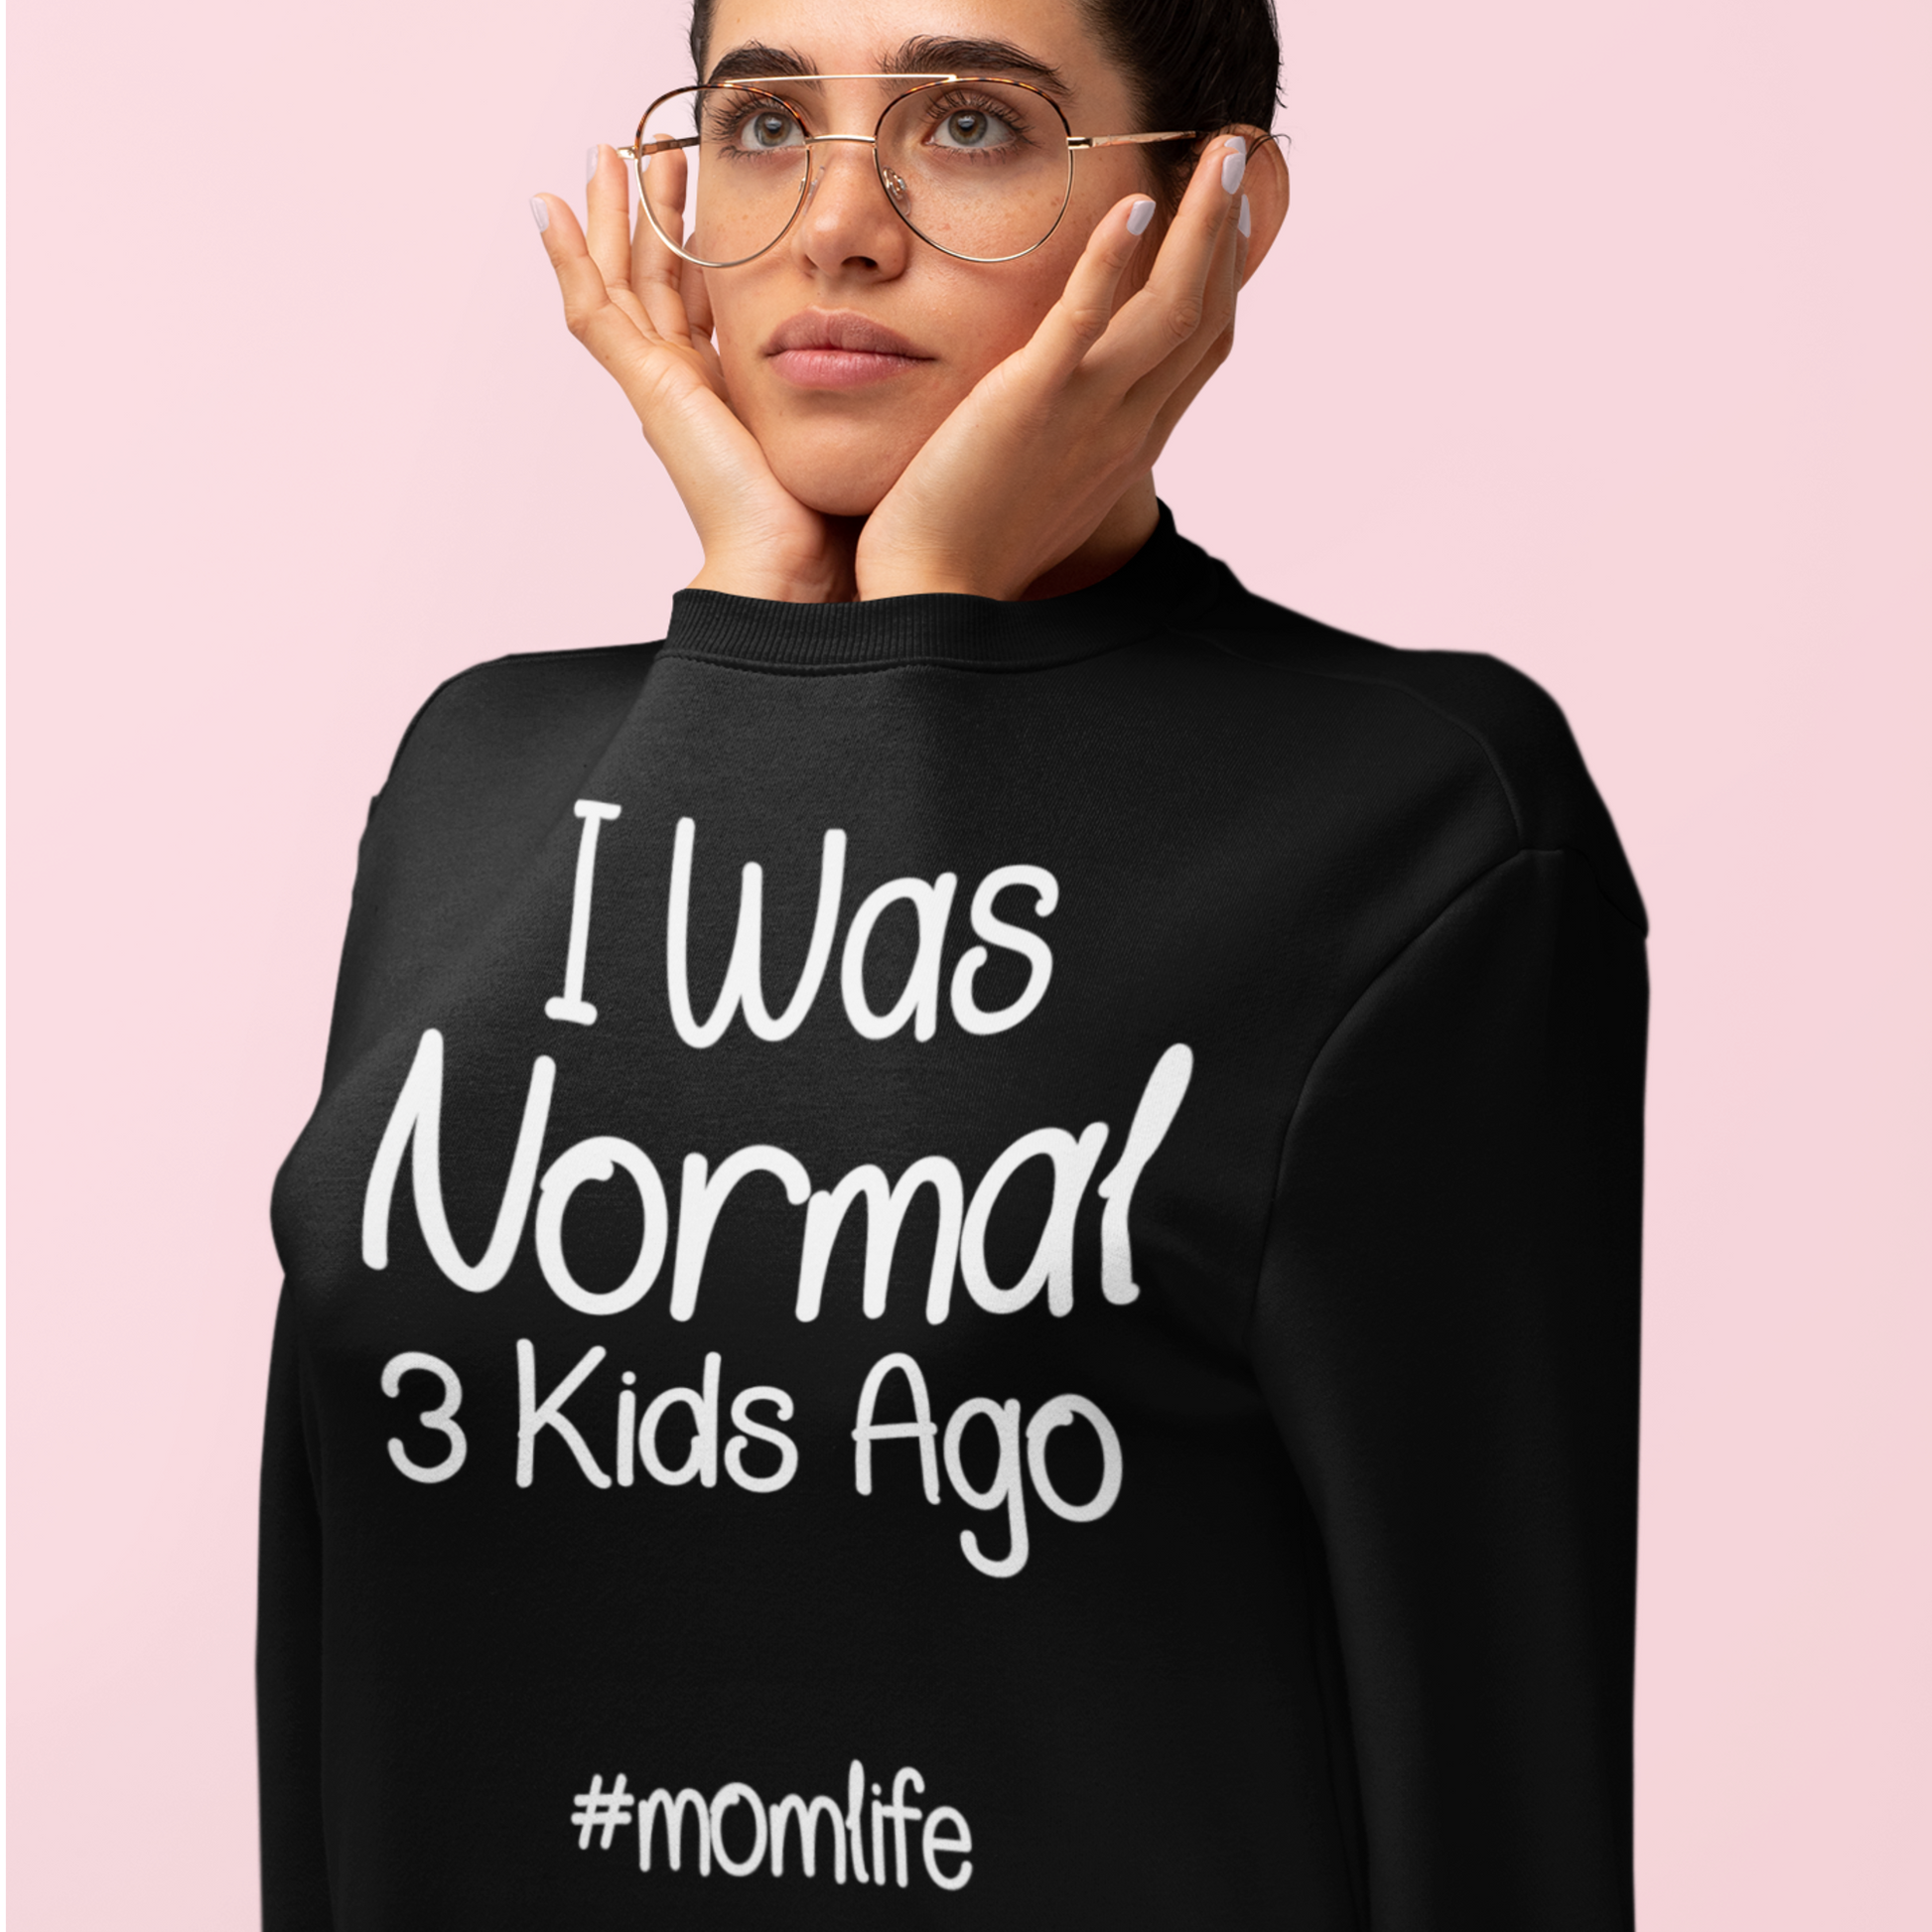 Funny Mother's Day Gift for Mom From Daughter, Sorry I Made Your Tits Saggy  Mum Shirt, Funny Sweatshirt for Mom, Gift From Children -  Canada